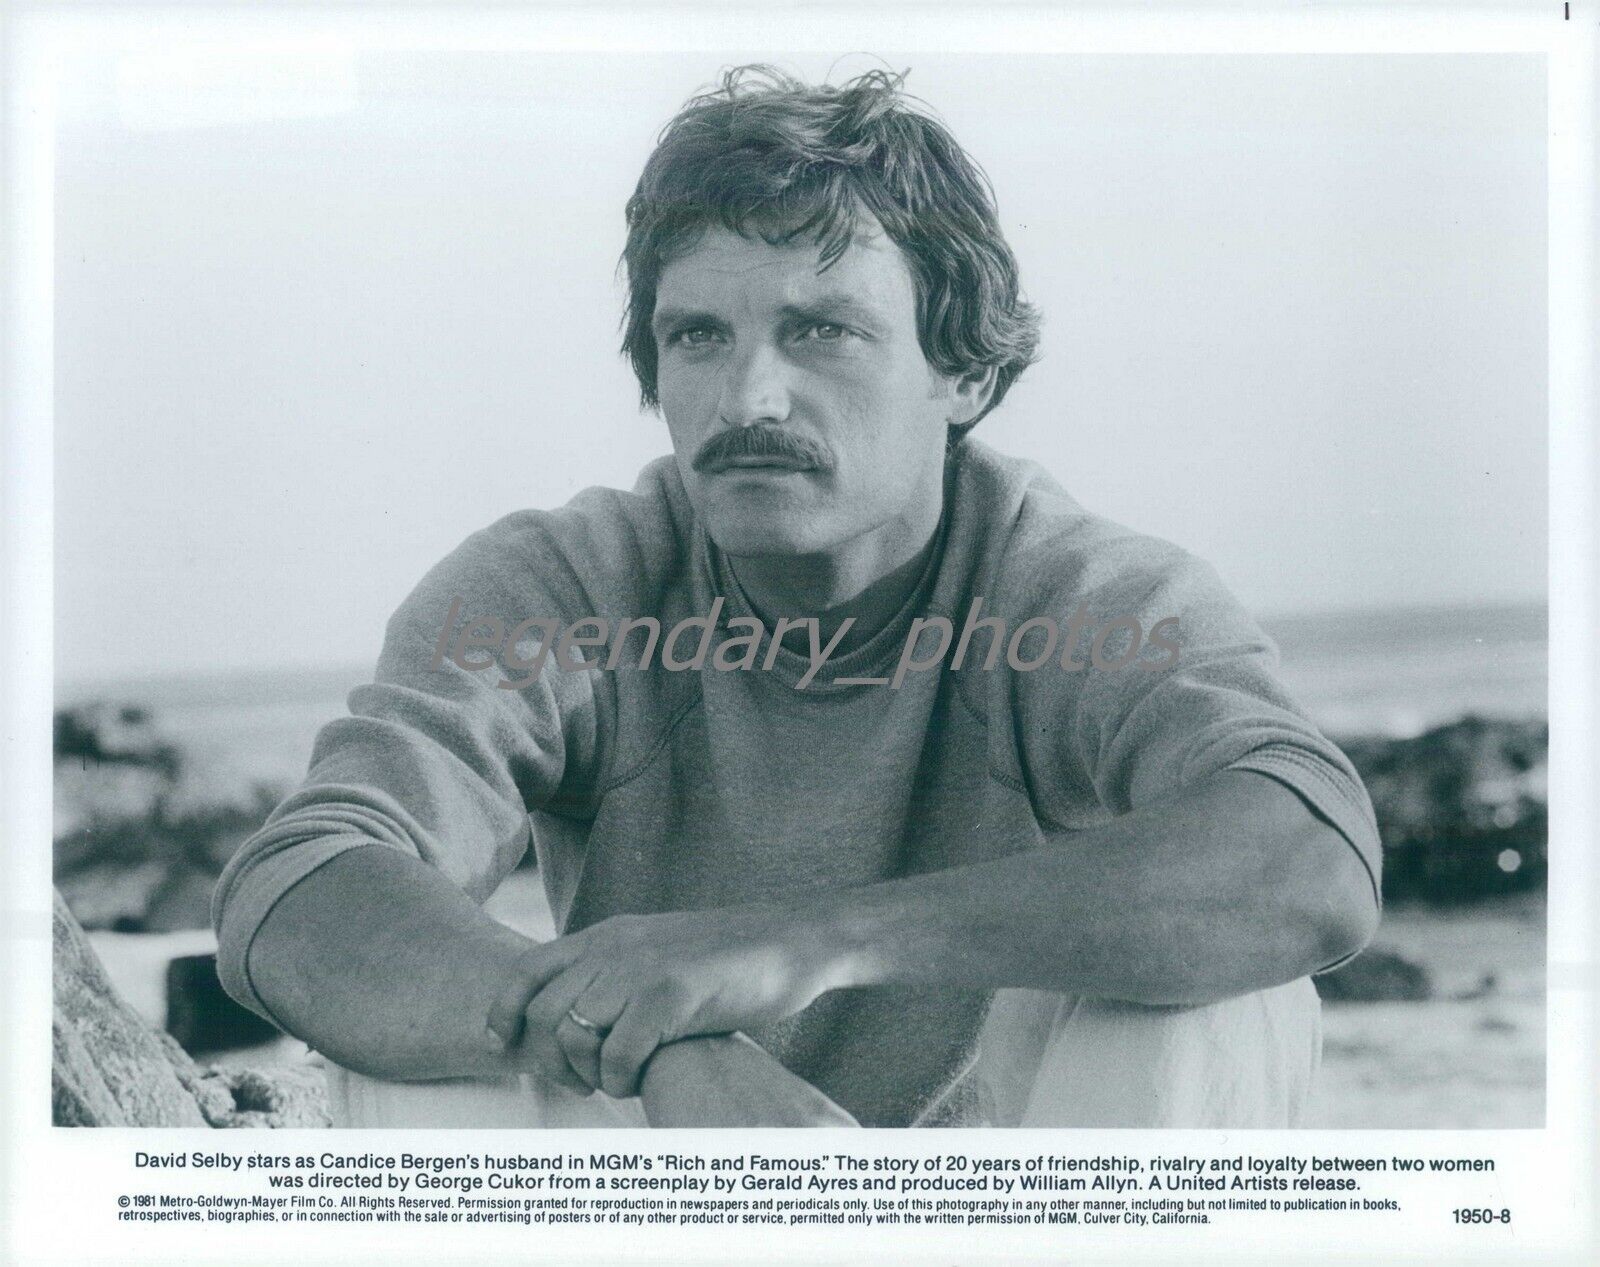 1981 Actor David Selby Star in Rich and Famous Original News Service Photo